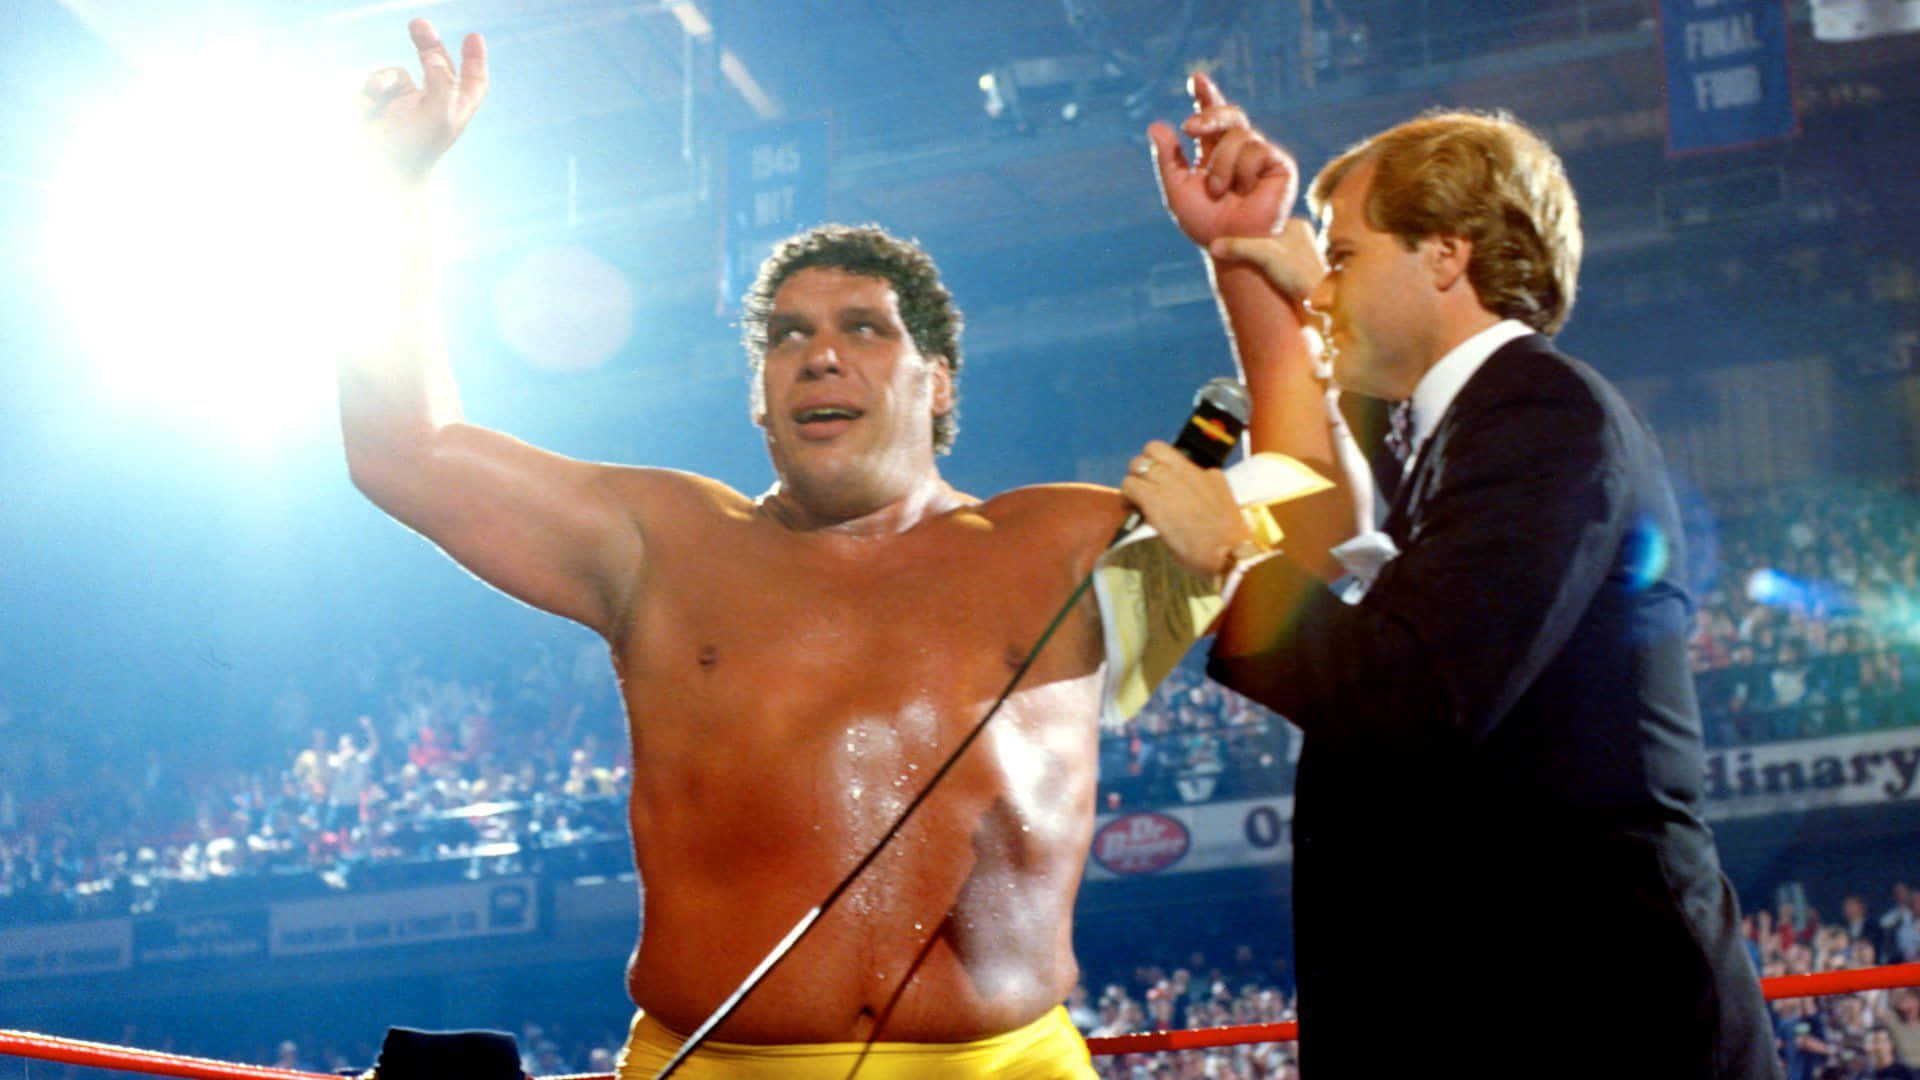 Andre The Giant Wrestlemania 2 Winner Picture